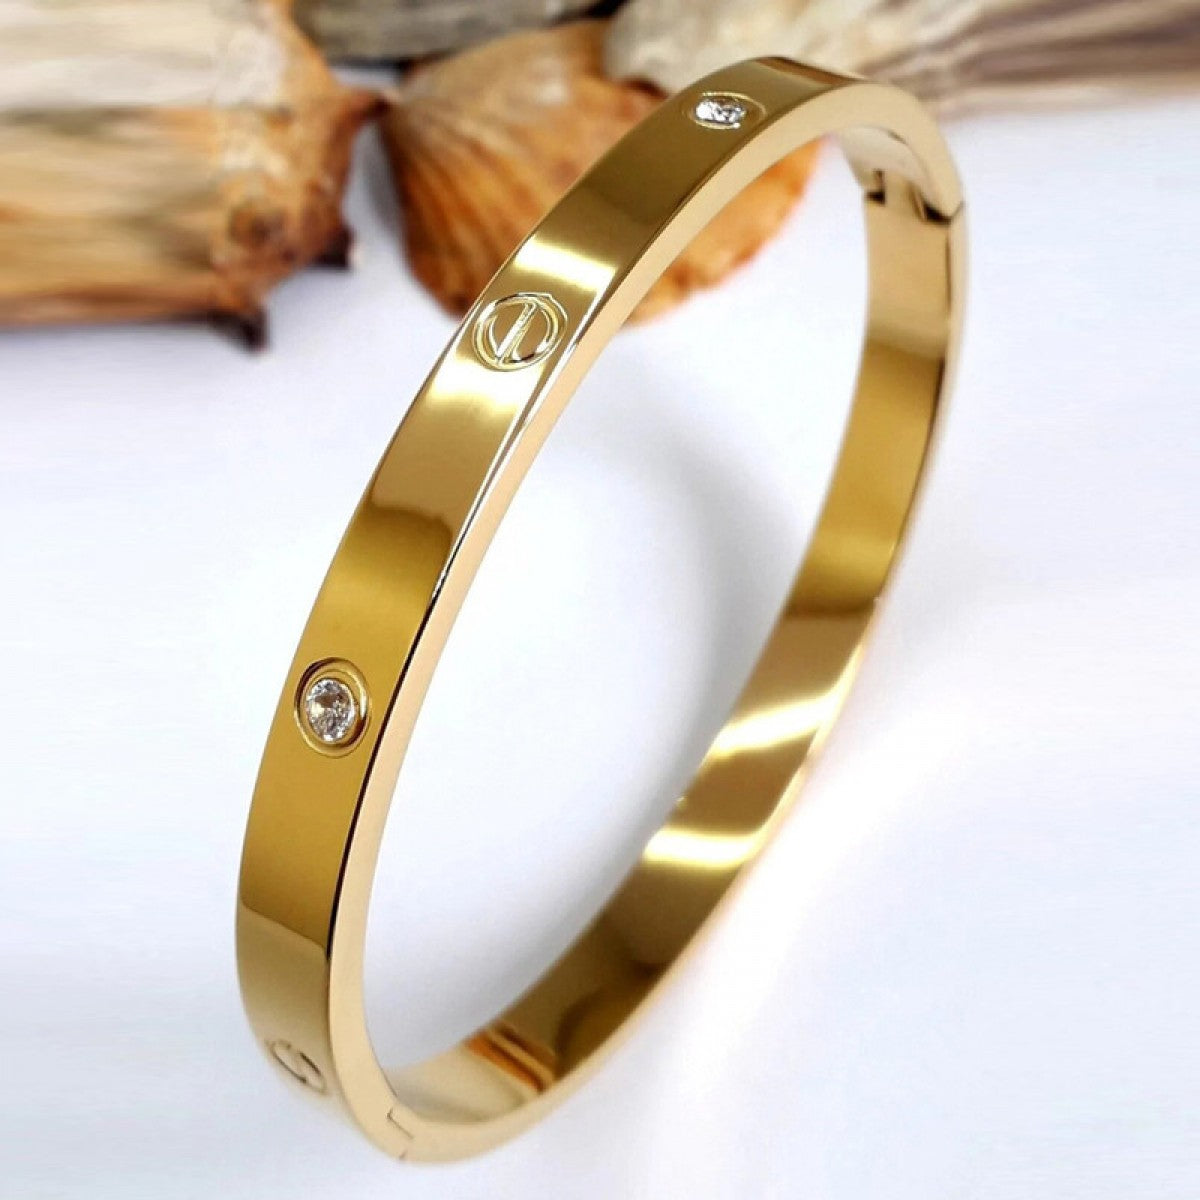 Cartier Gold Love Bangle Bracelet Available For Immediate Sale At Sotheby's